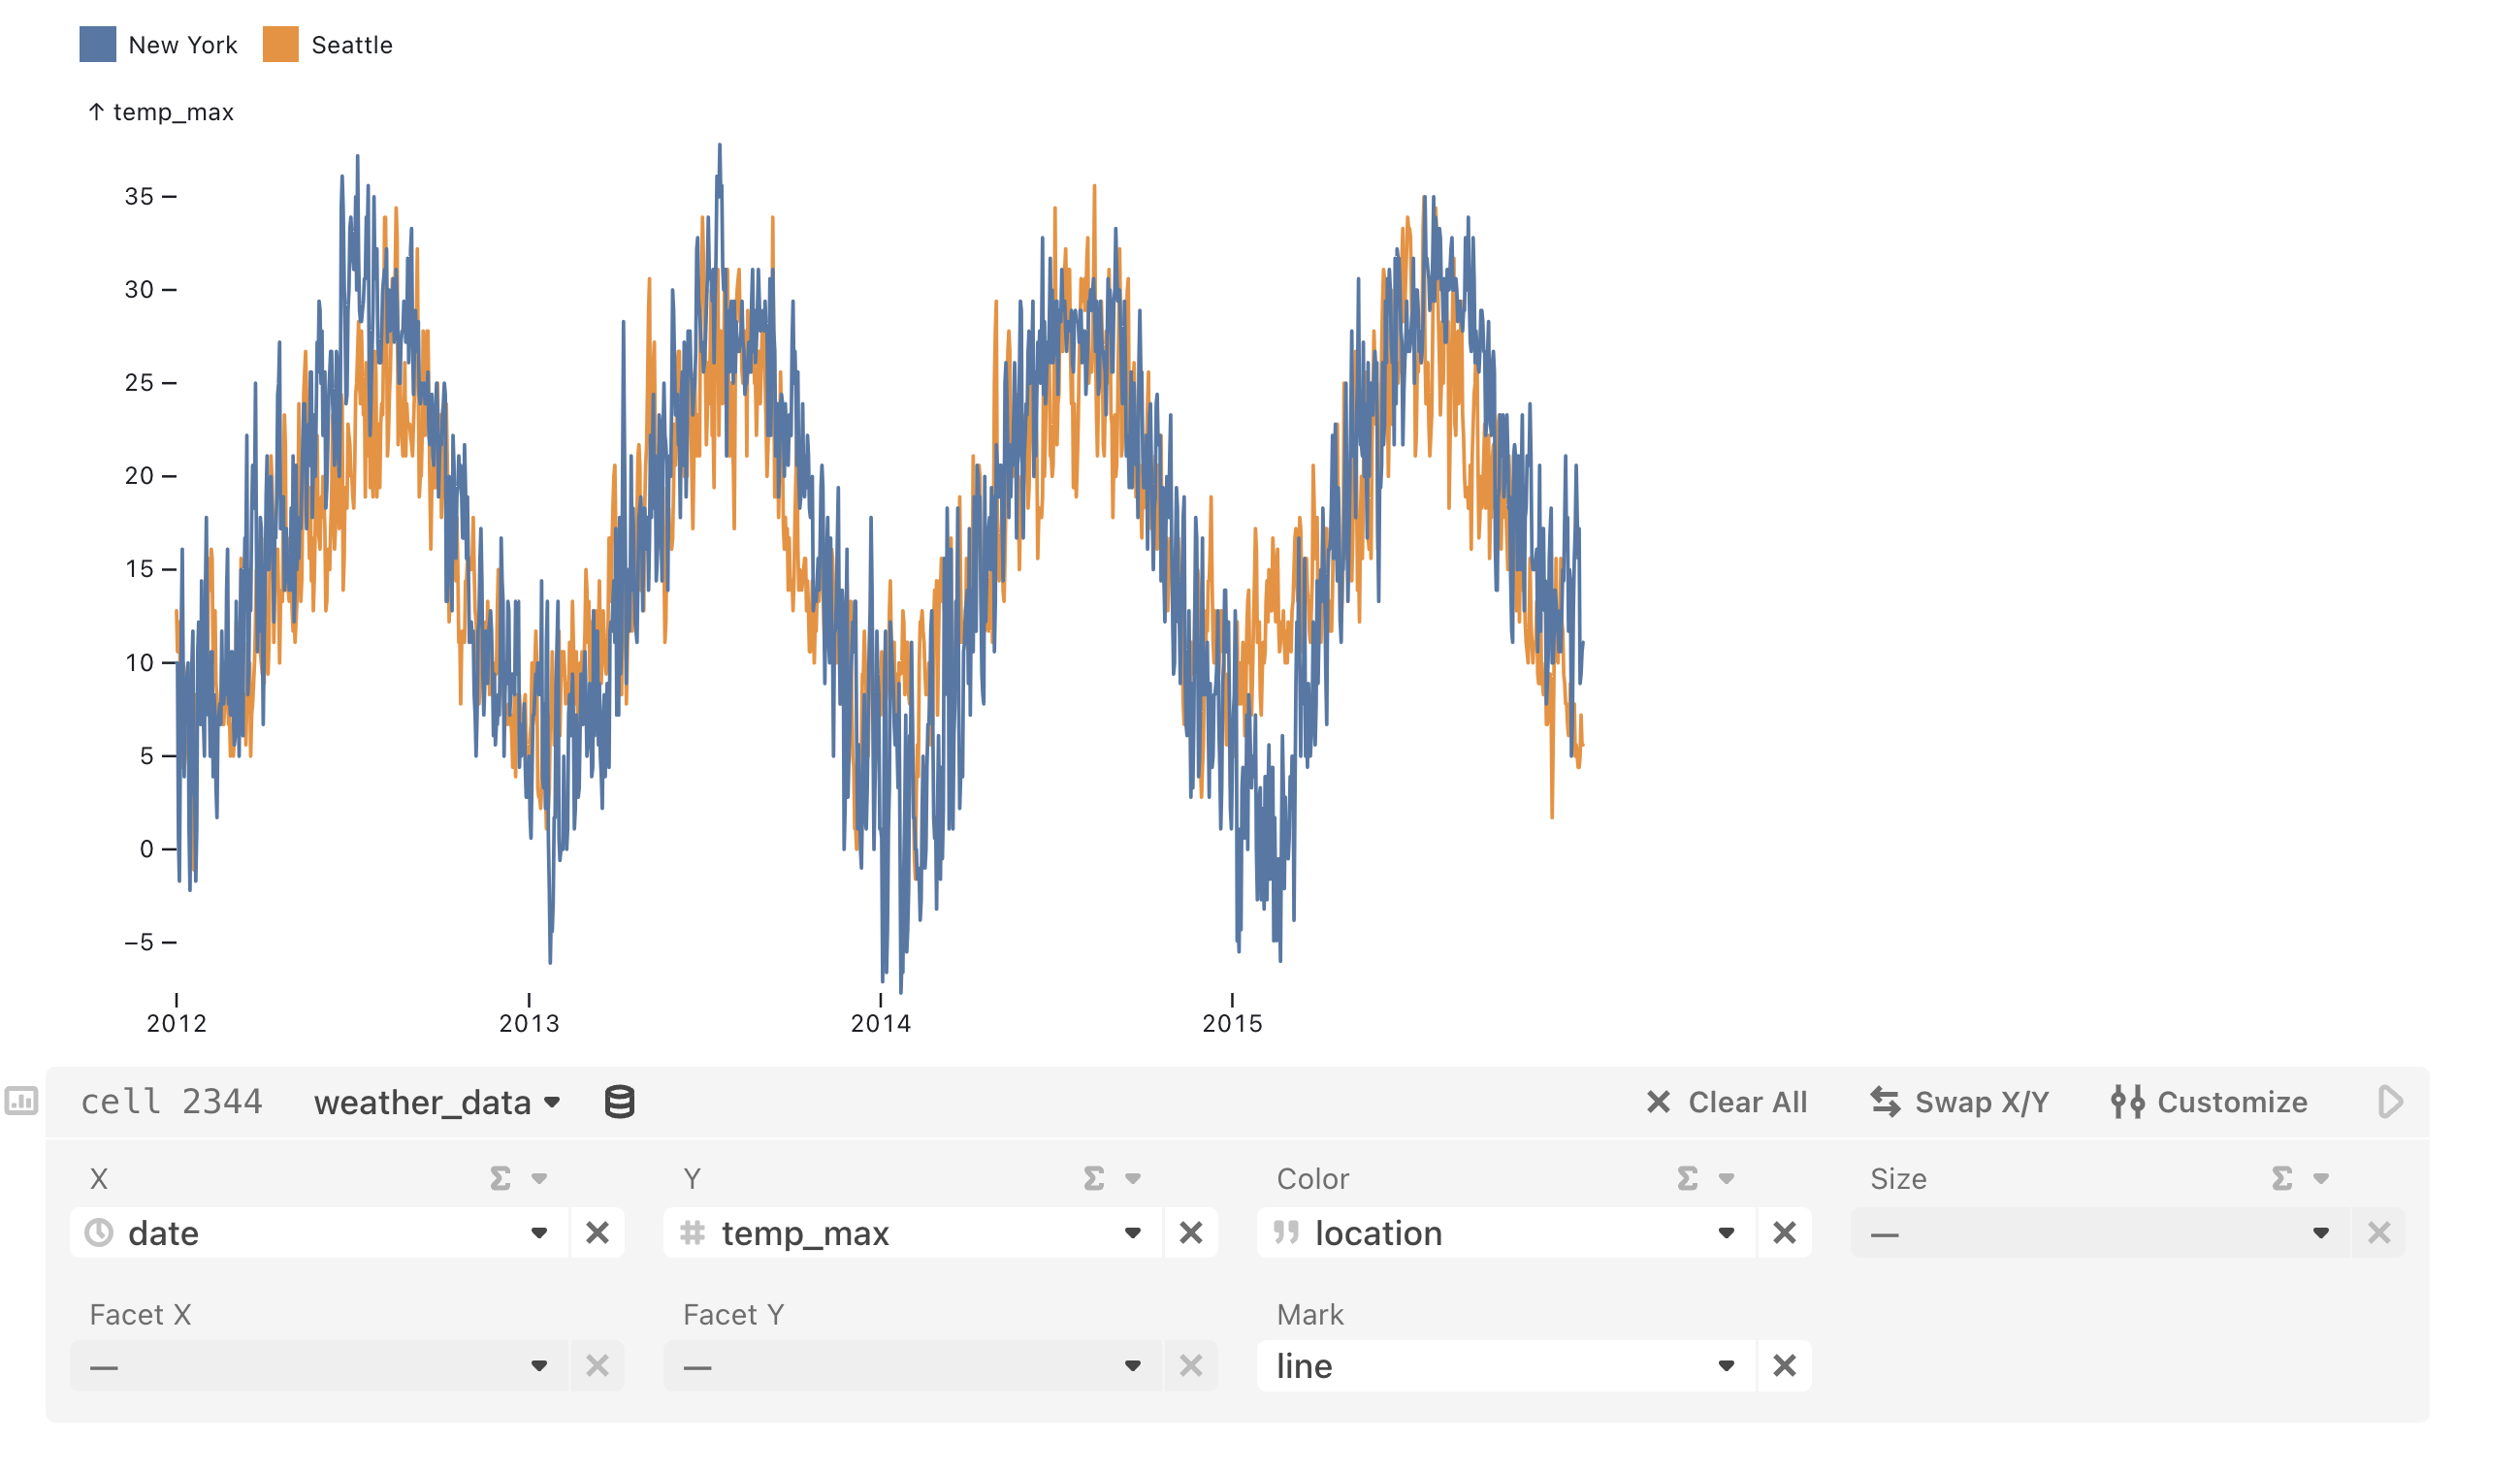 A screenshot of a line chart comparing Seattle and New York weather data across time.